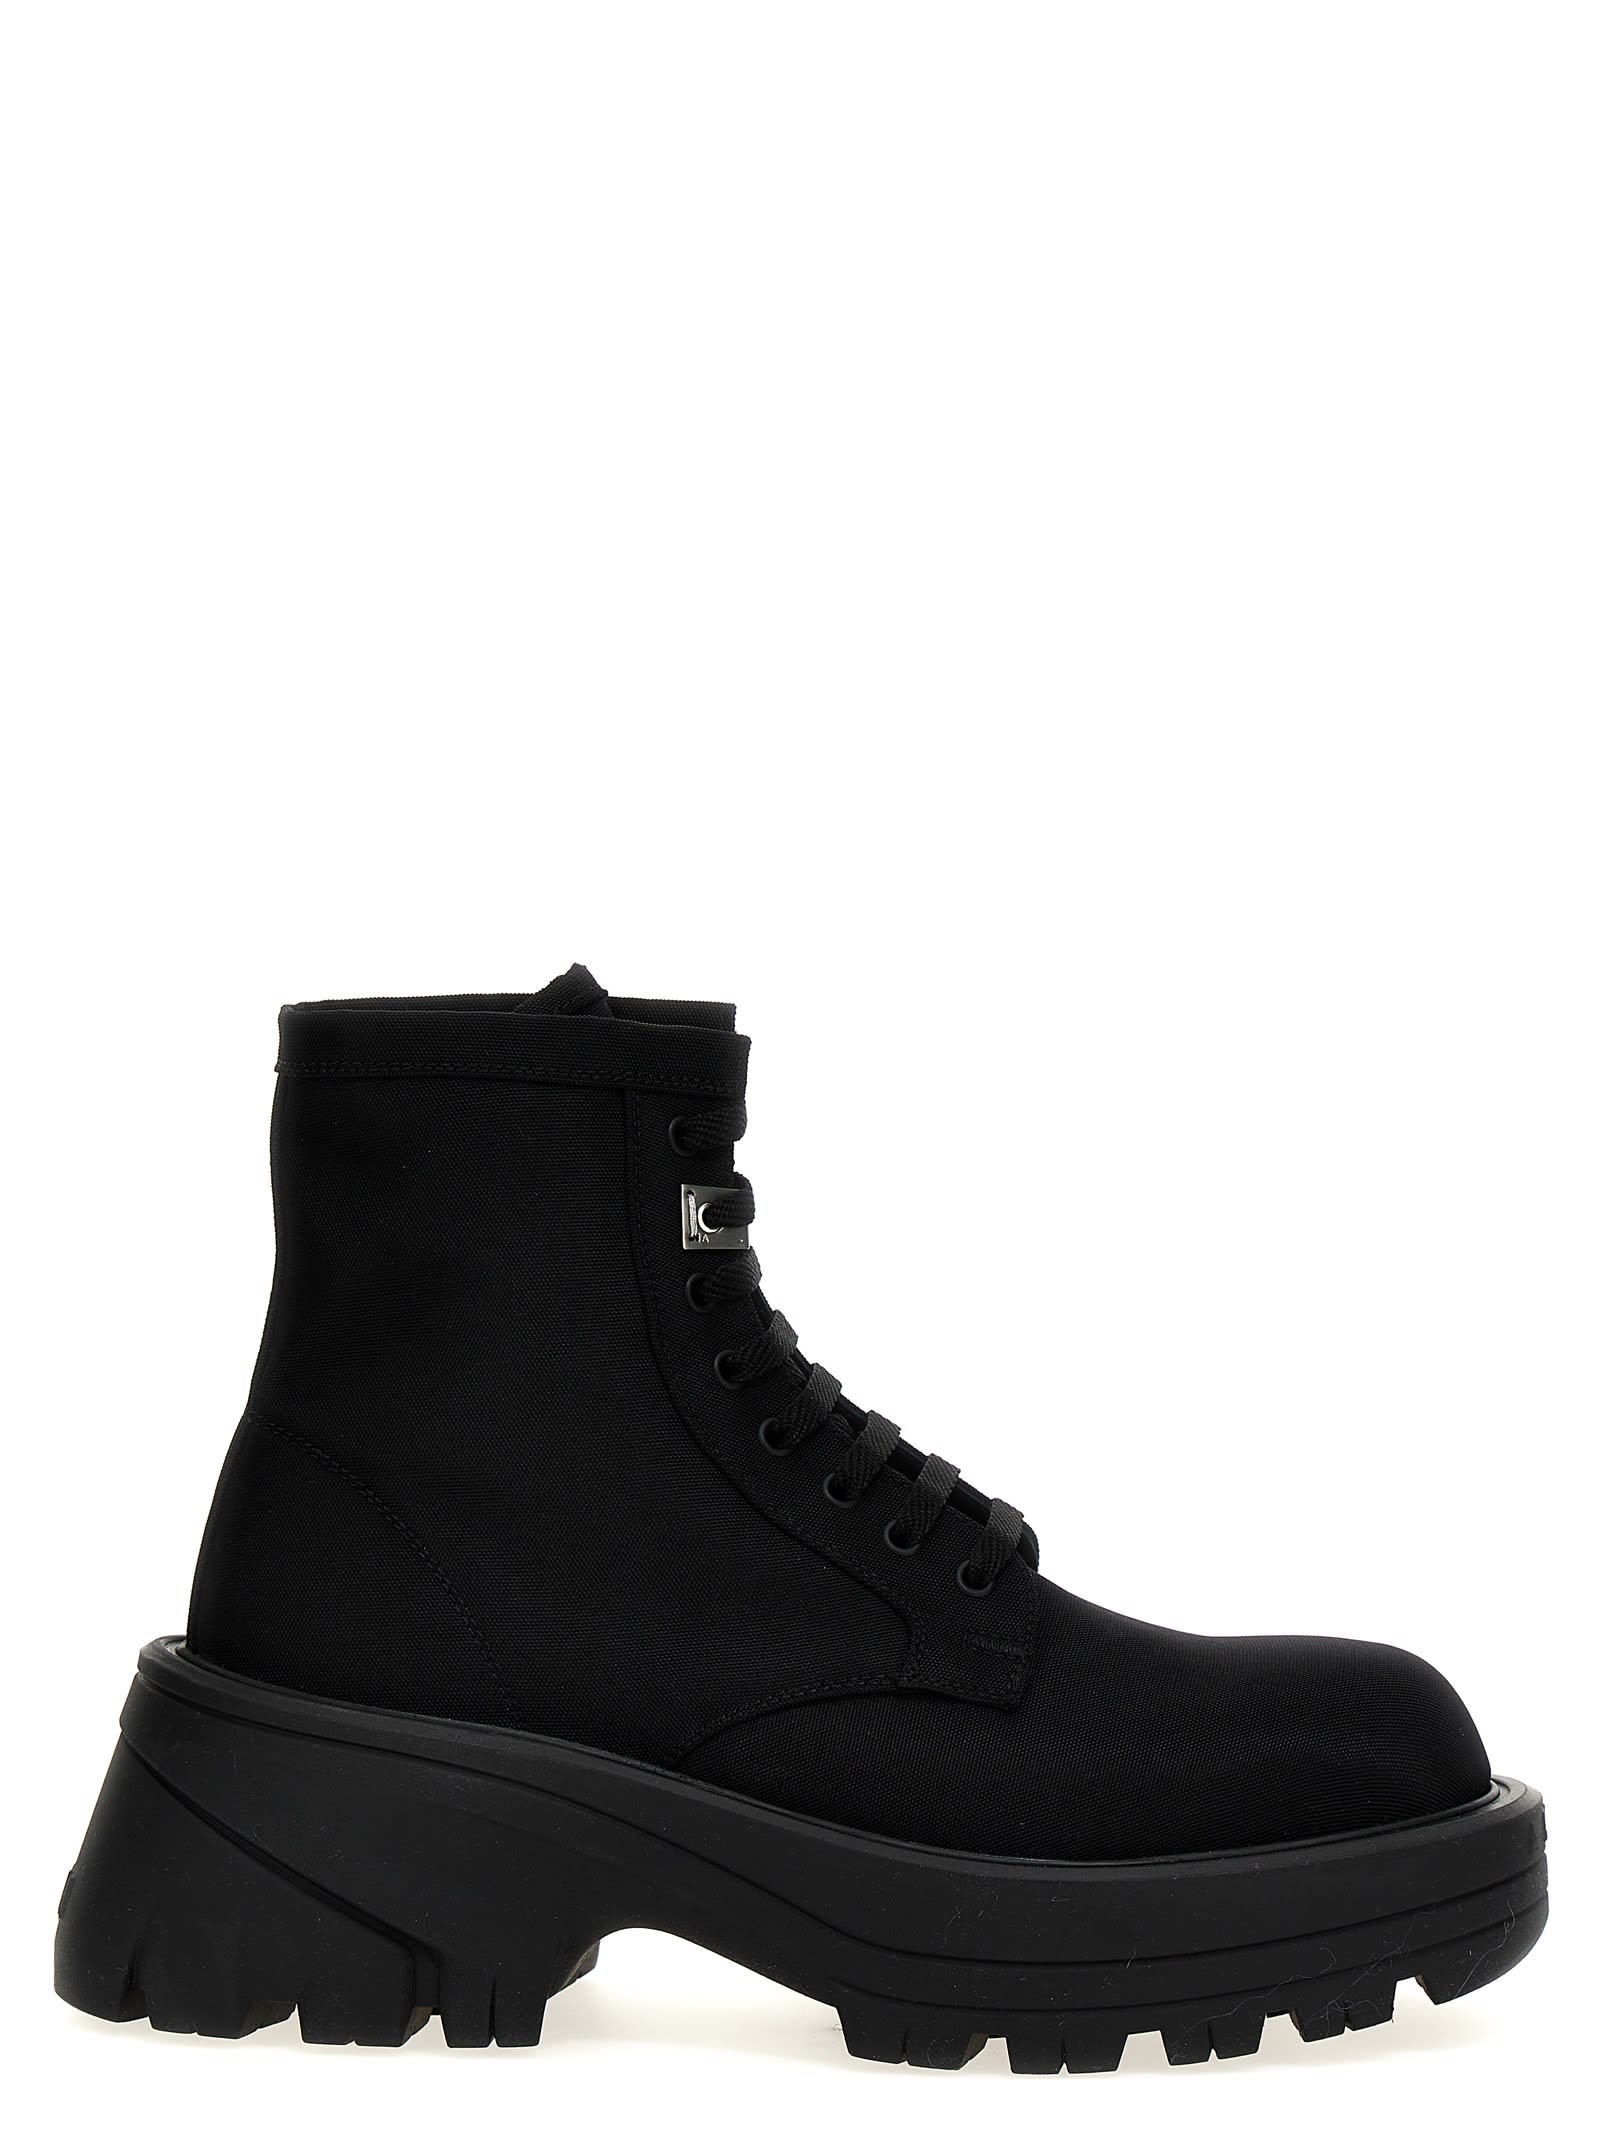 ALYX PARABOOT ANKLE BOOTS